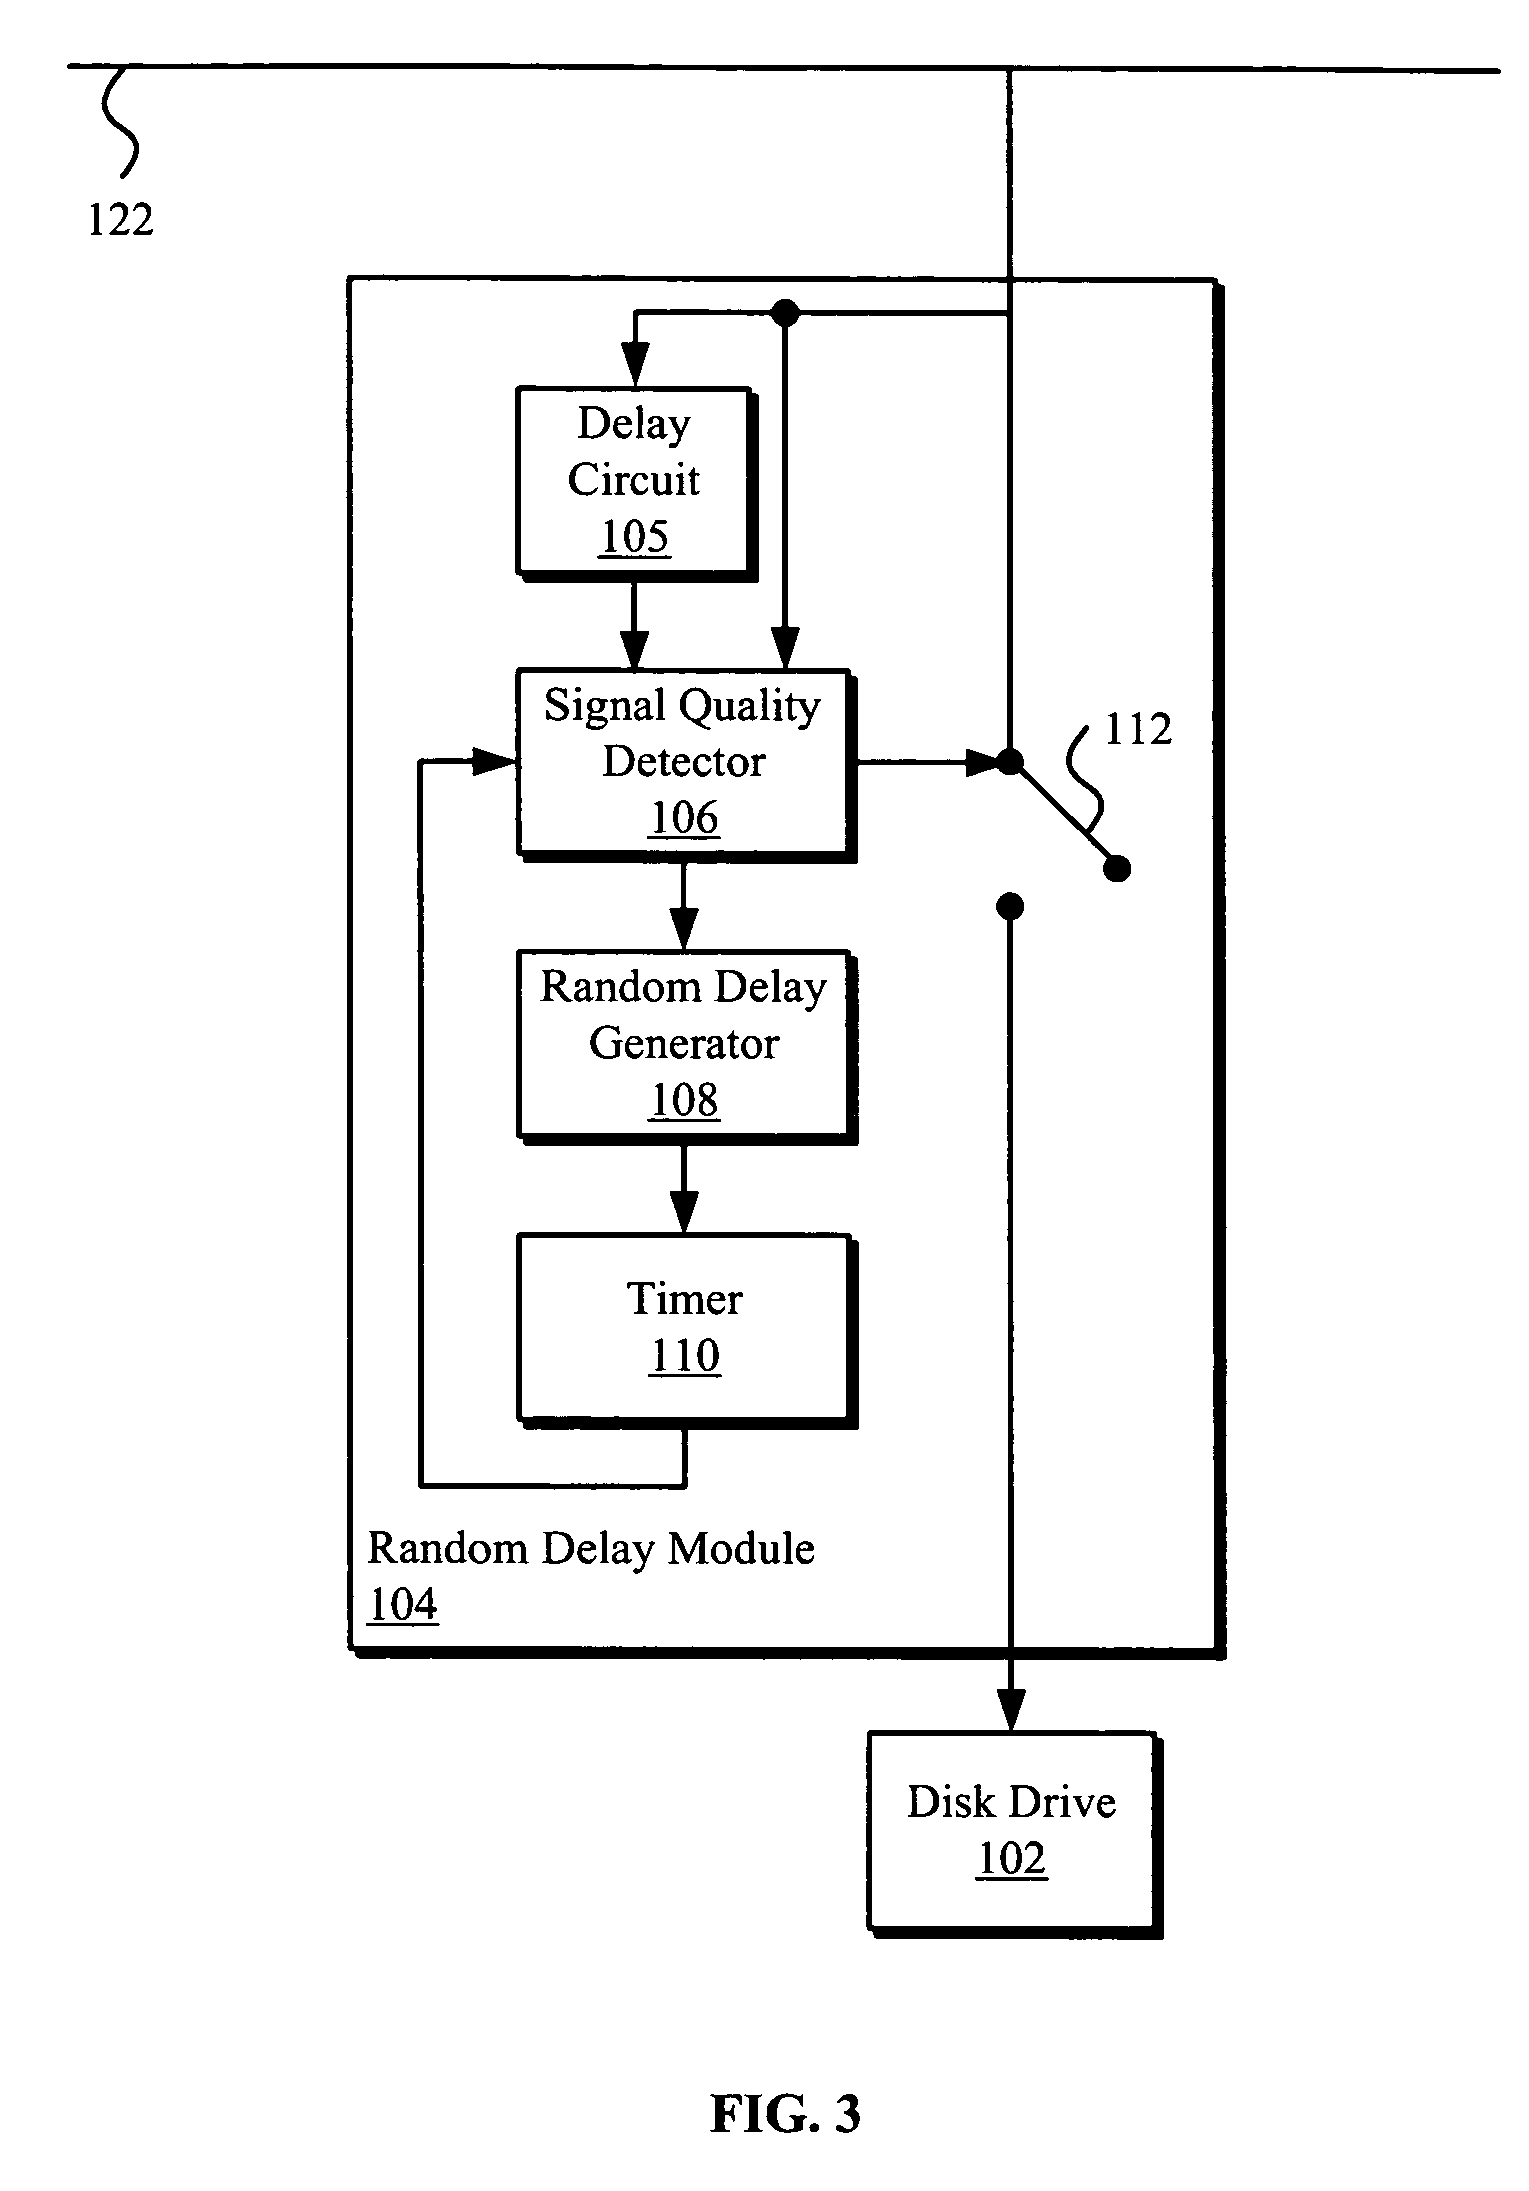 Systems and methods for delay in startup of multiple components